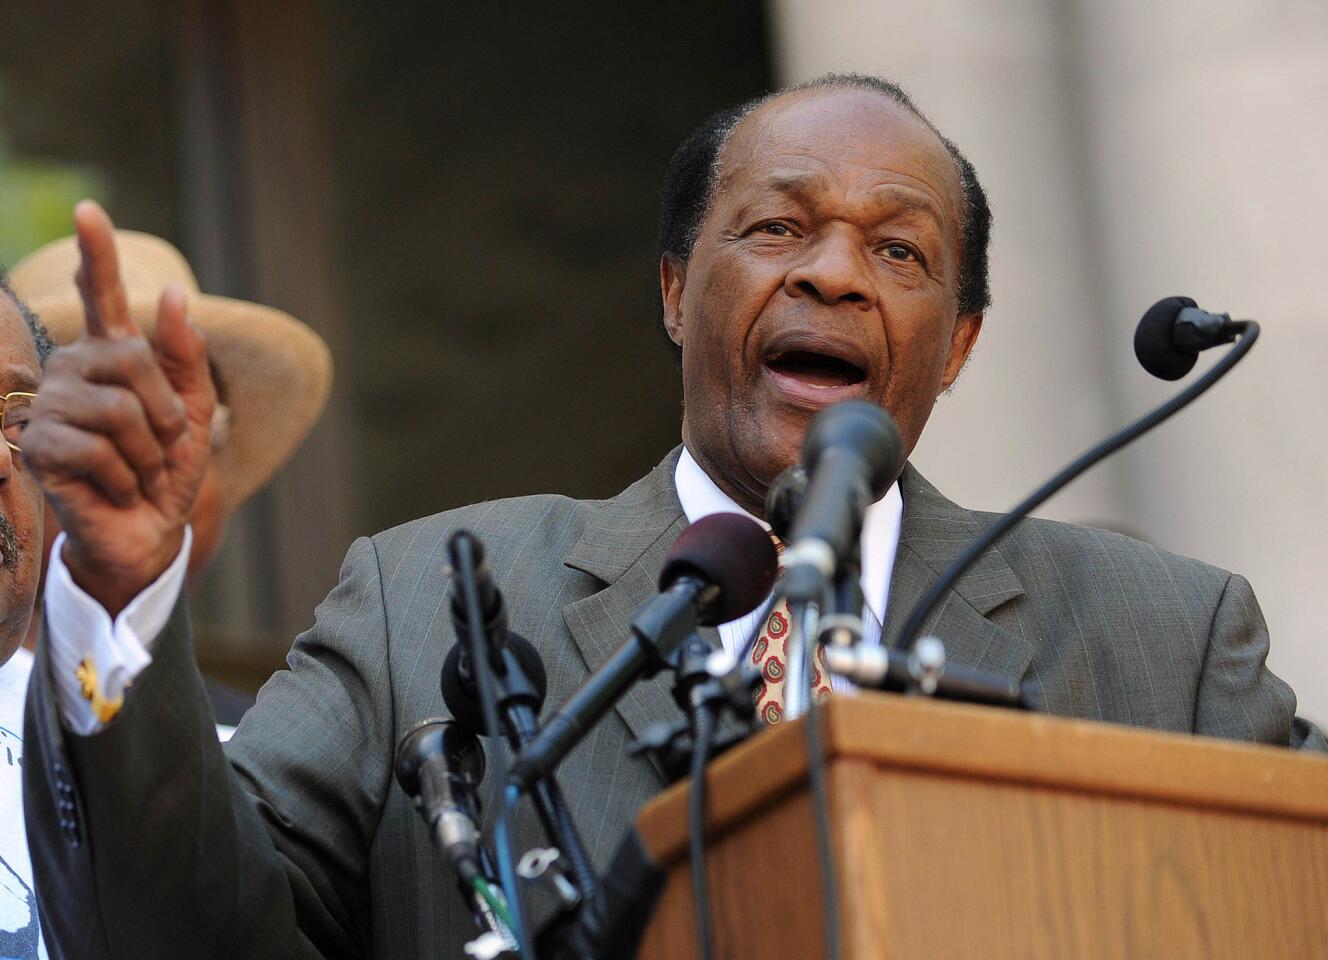 Marion Barry died Nov. 23 at age 78 in Washington, D.C. The cause of death was not initially disclosed.